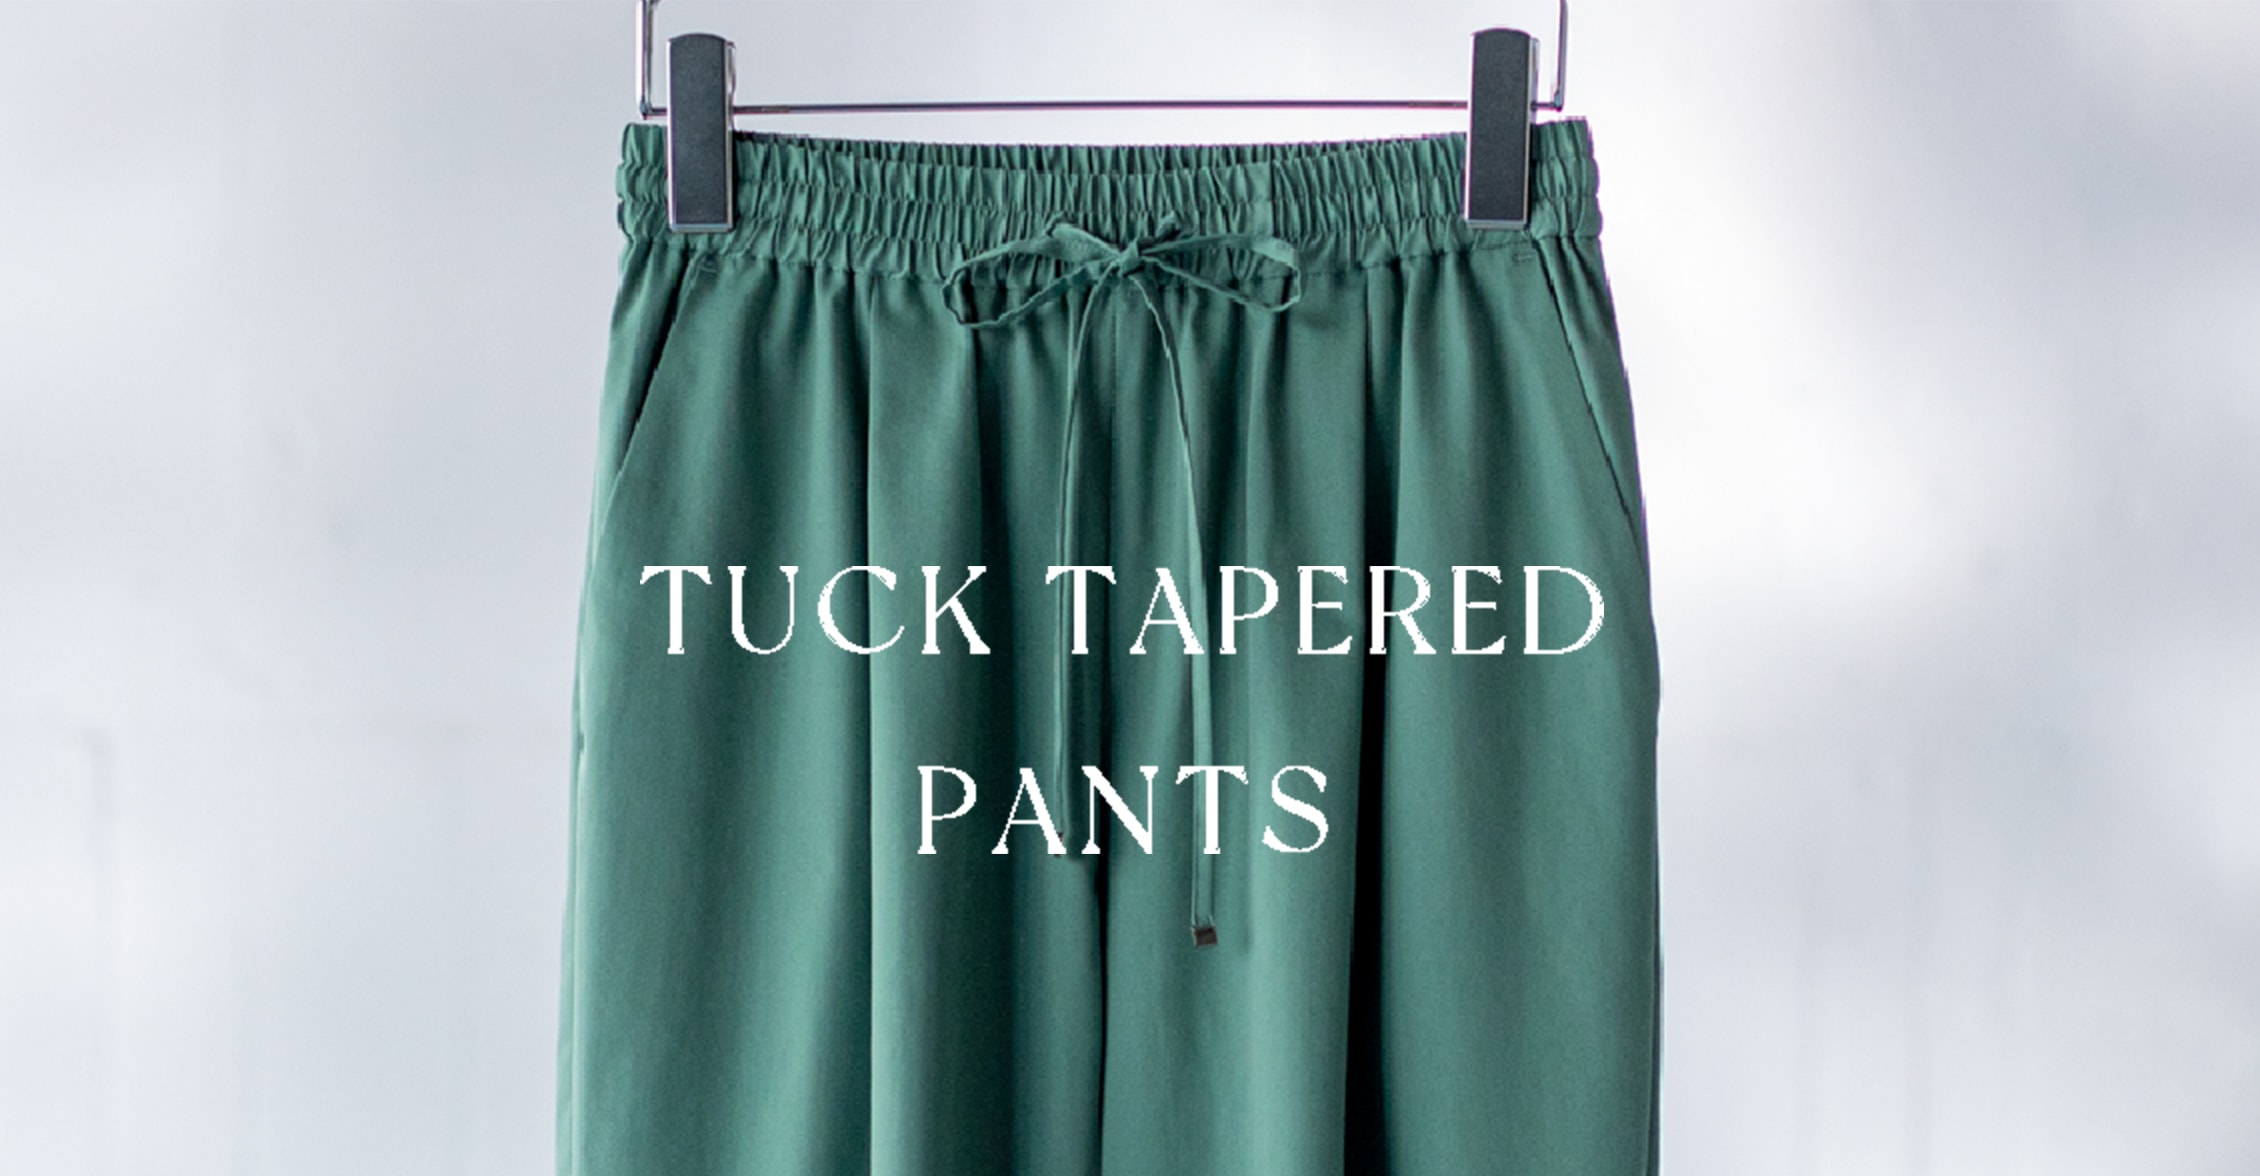 TUCK TAPERED PANTS - item